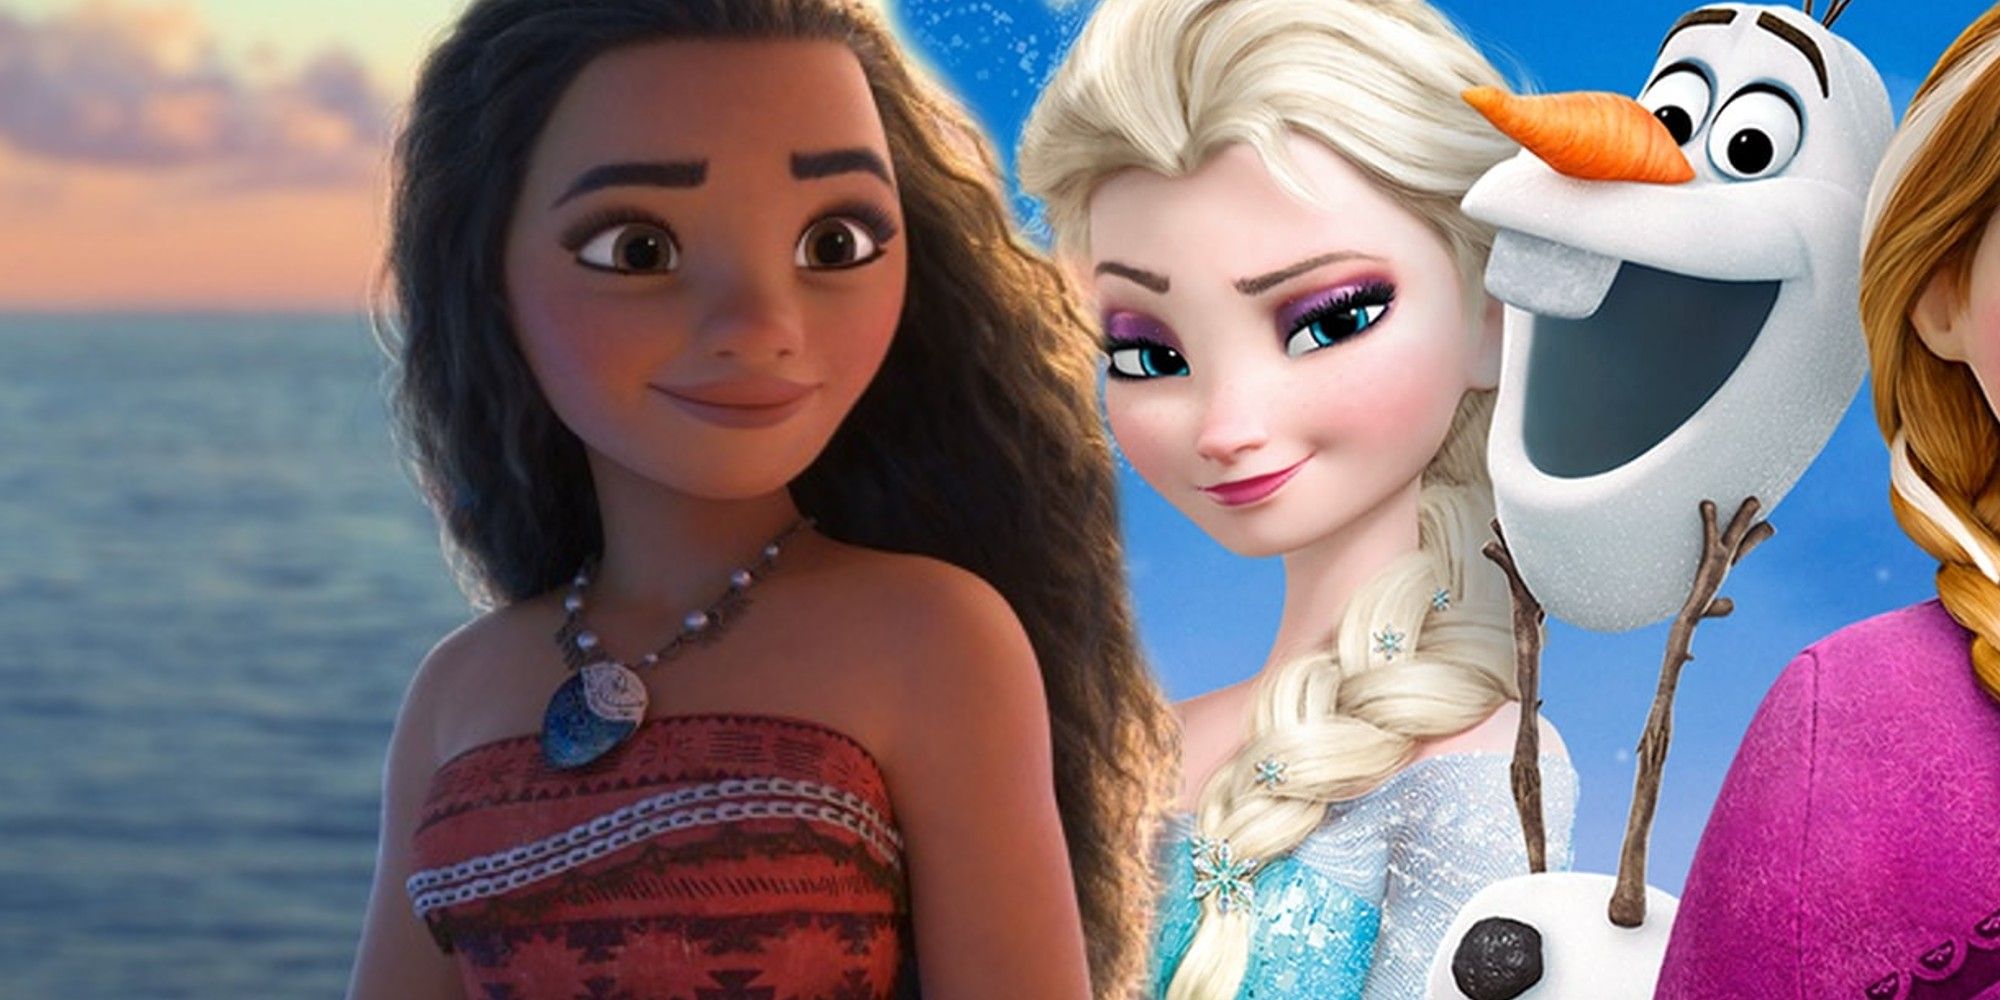 Moana and Frozen combined image